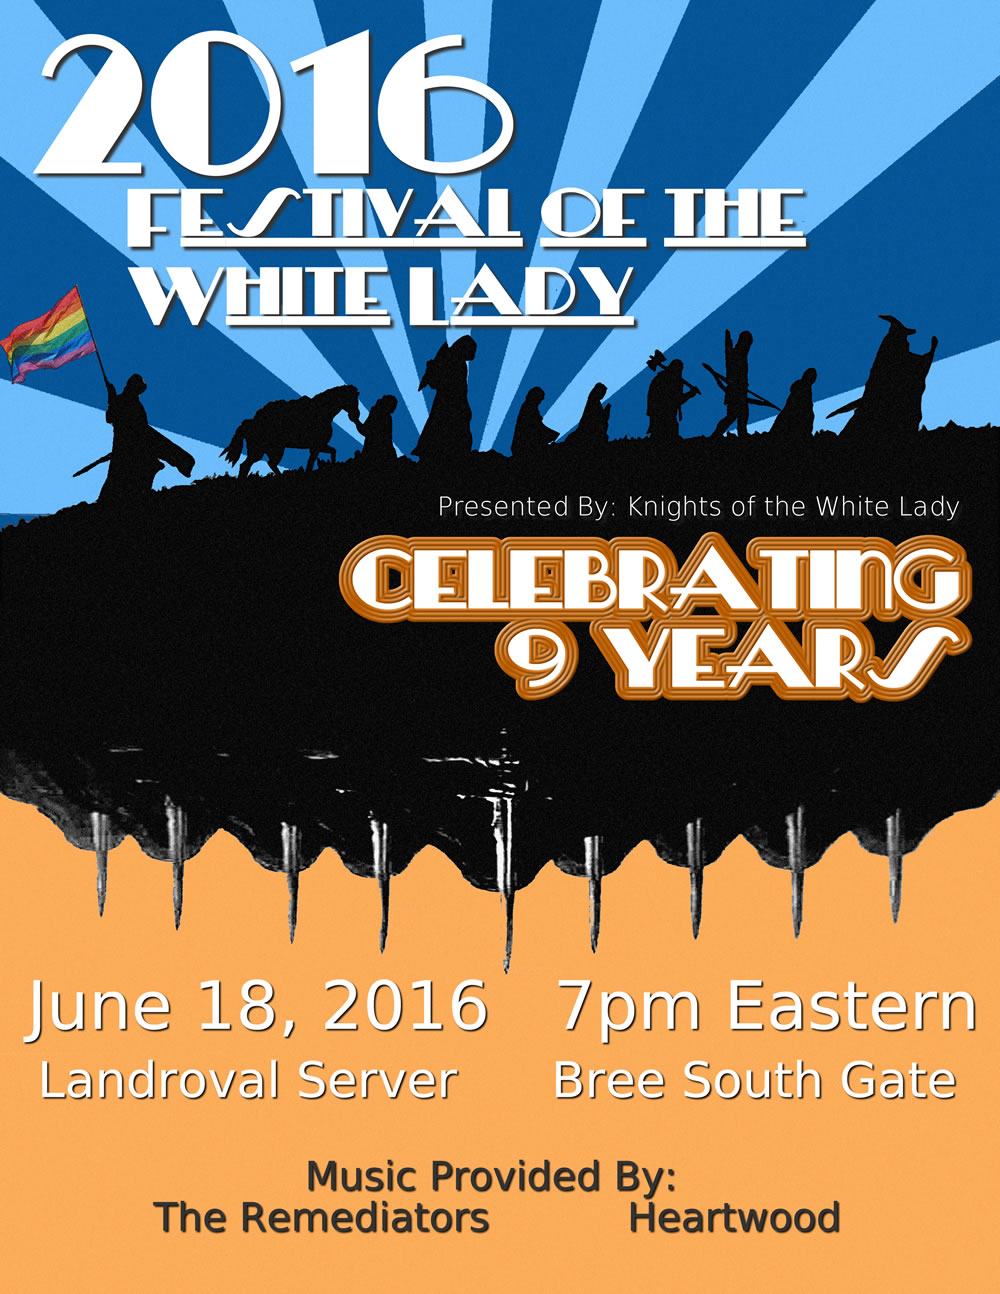 Saturday, June 18 at 7:00 pm Server Time. Parade starts at Bree South Gate--all are invited!